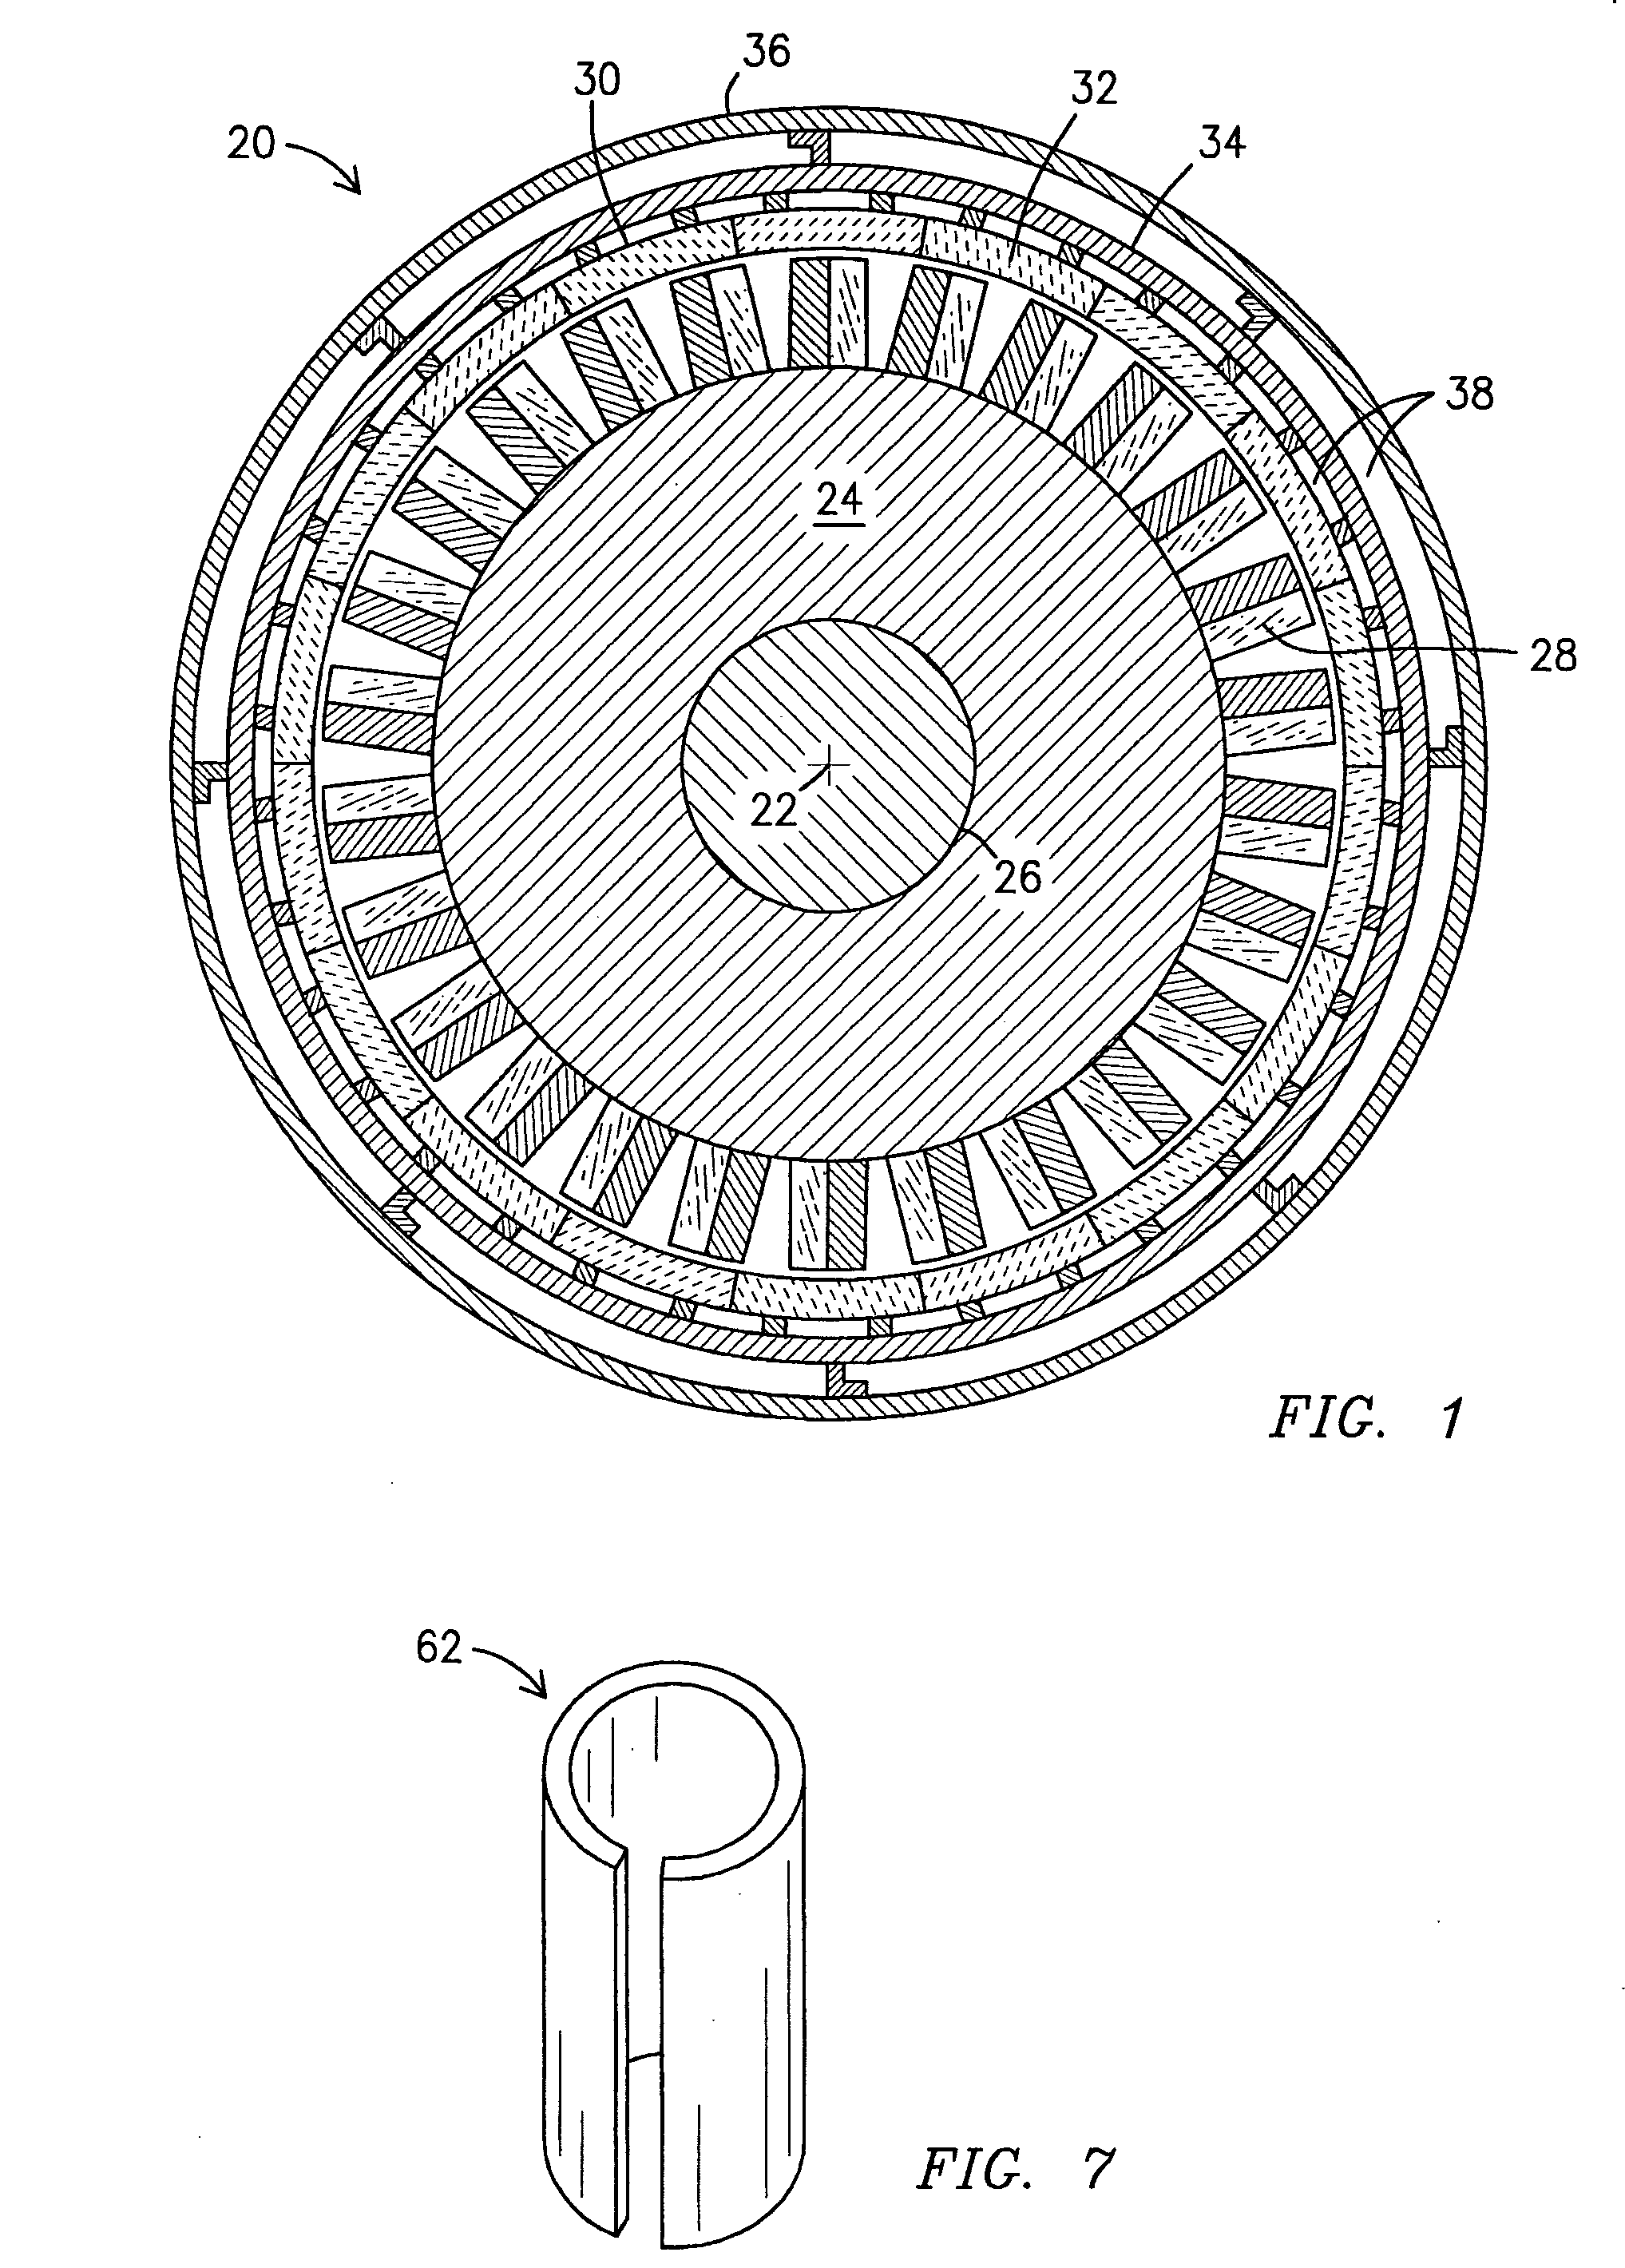 Pin-loaded mounting apparatus for a refractory component in a combustion turbine engine